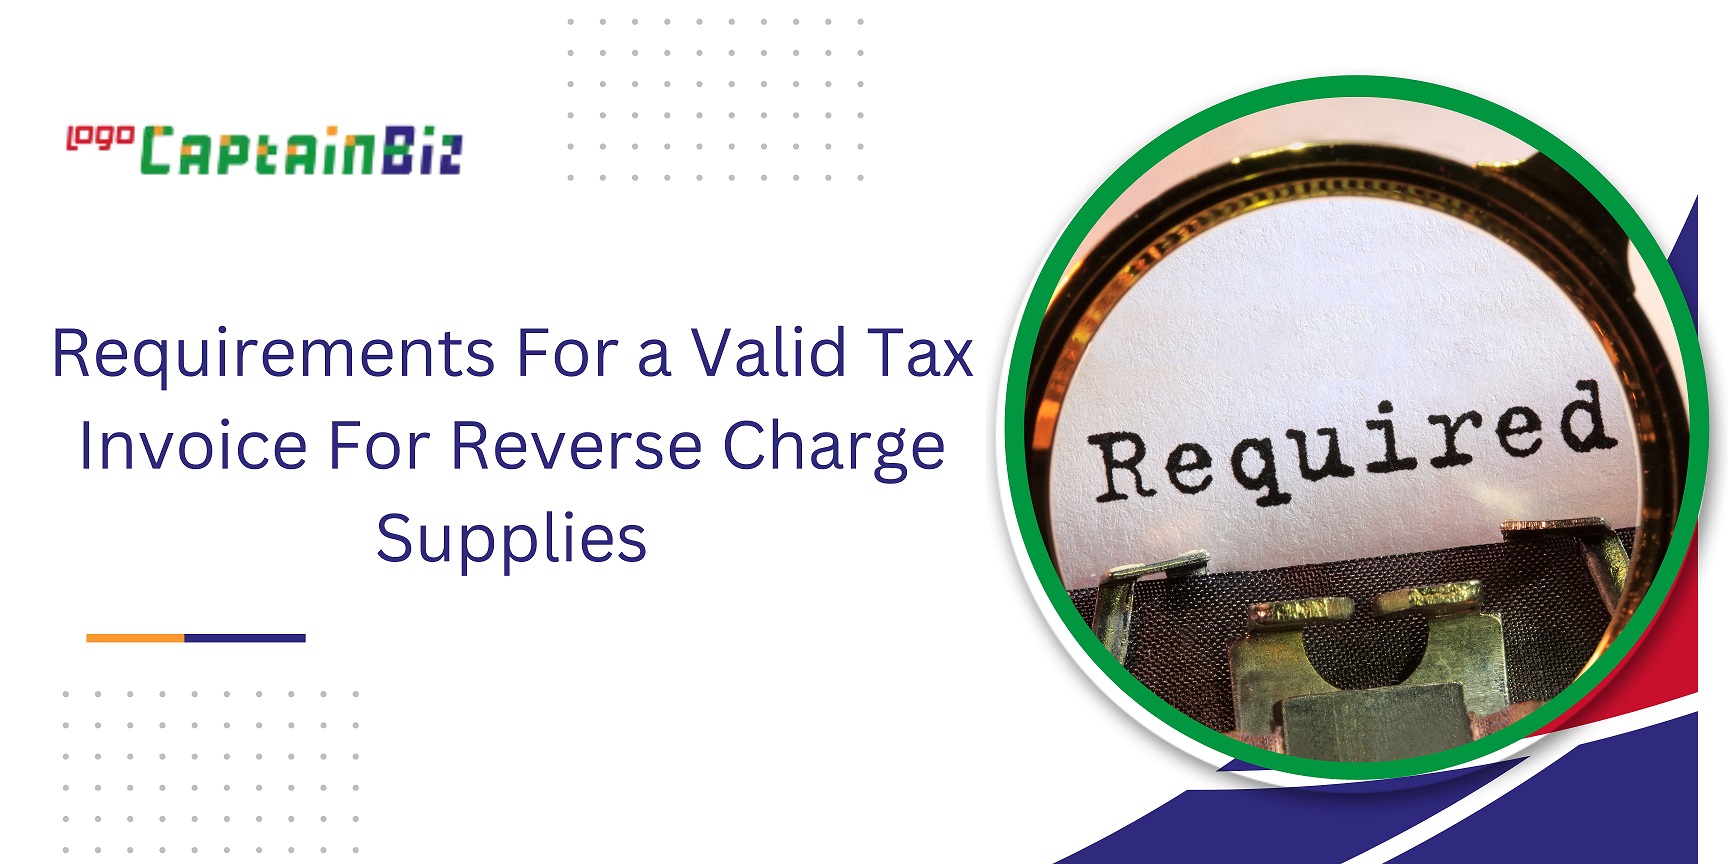 CaptainBiz: Requirements For a Valid Tax Invoice For Reverse Charge Supplies